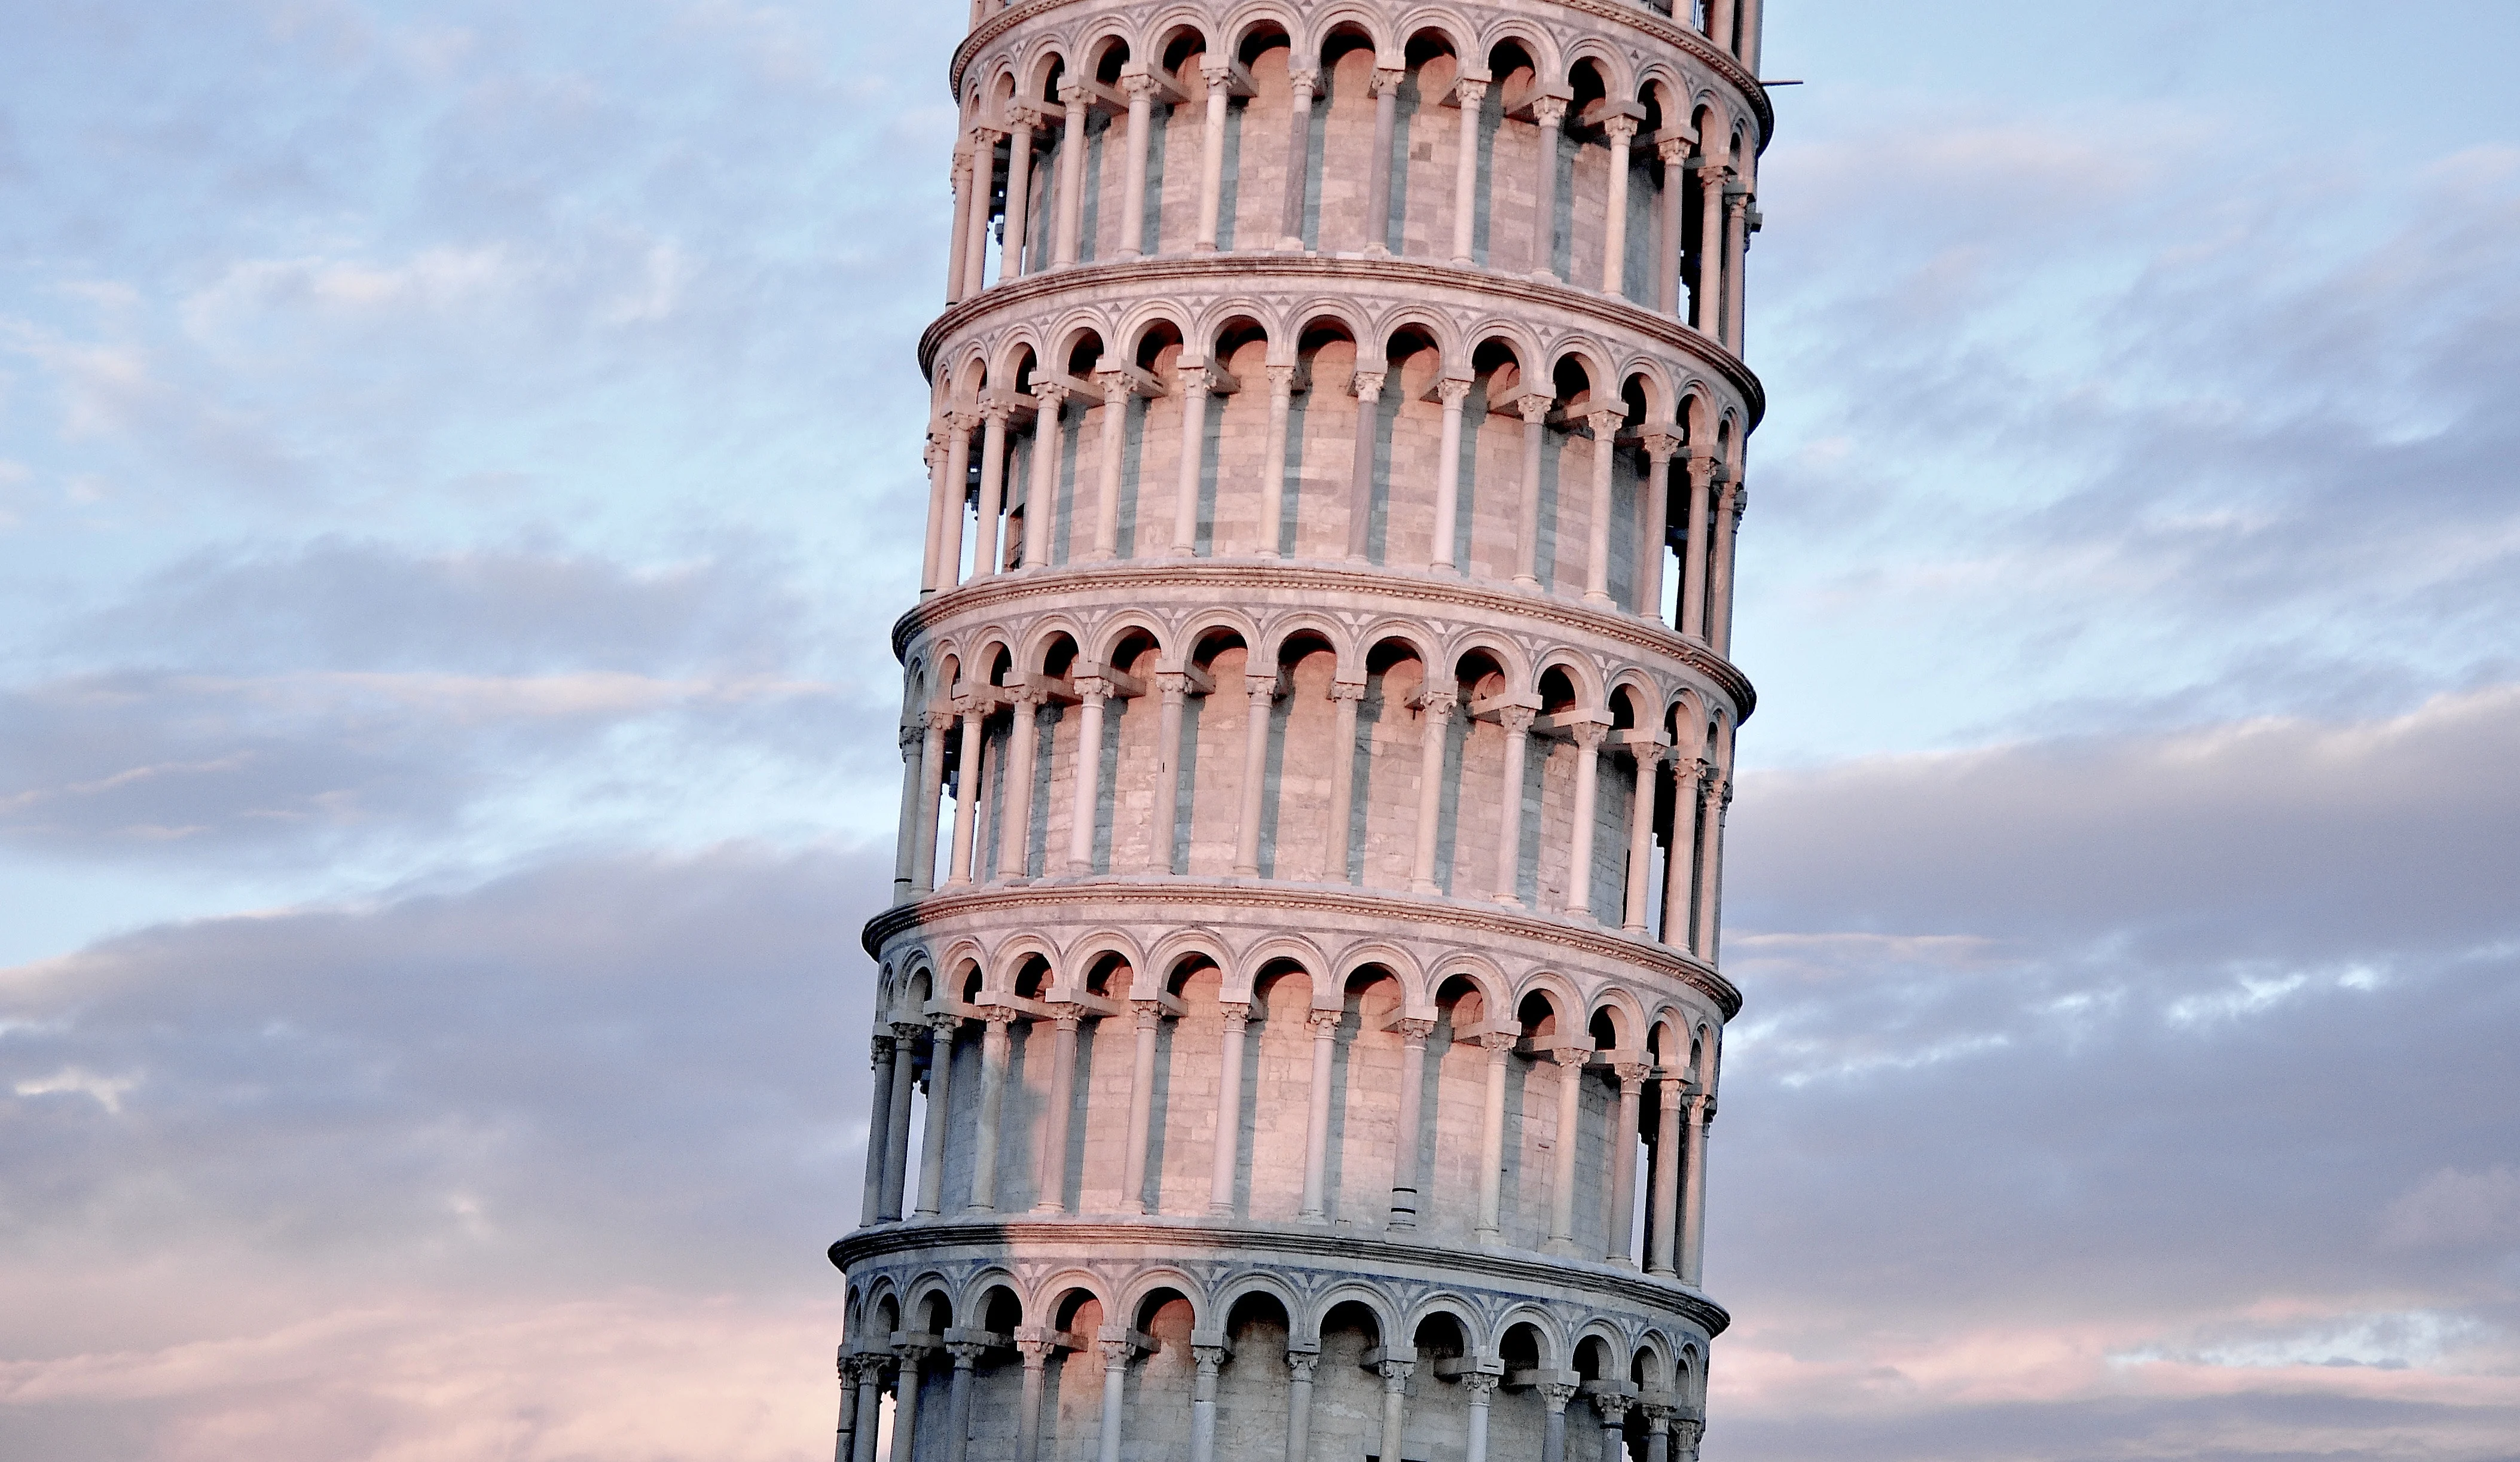 The leaning tower of Pisa is one of the most famous places in Italy. Can you guess the others